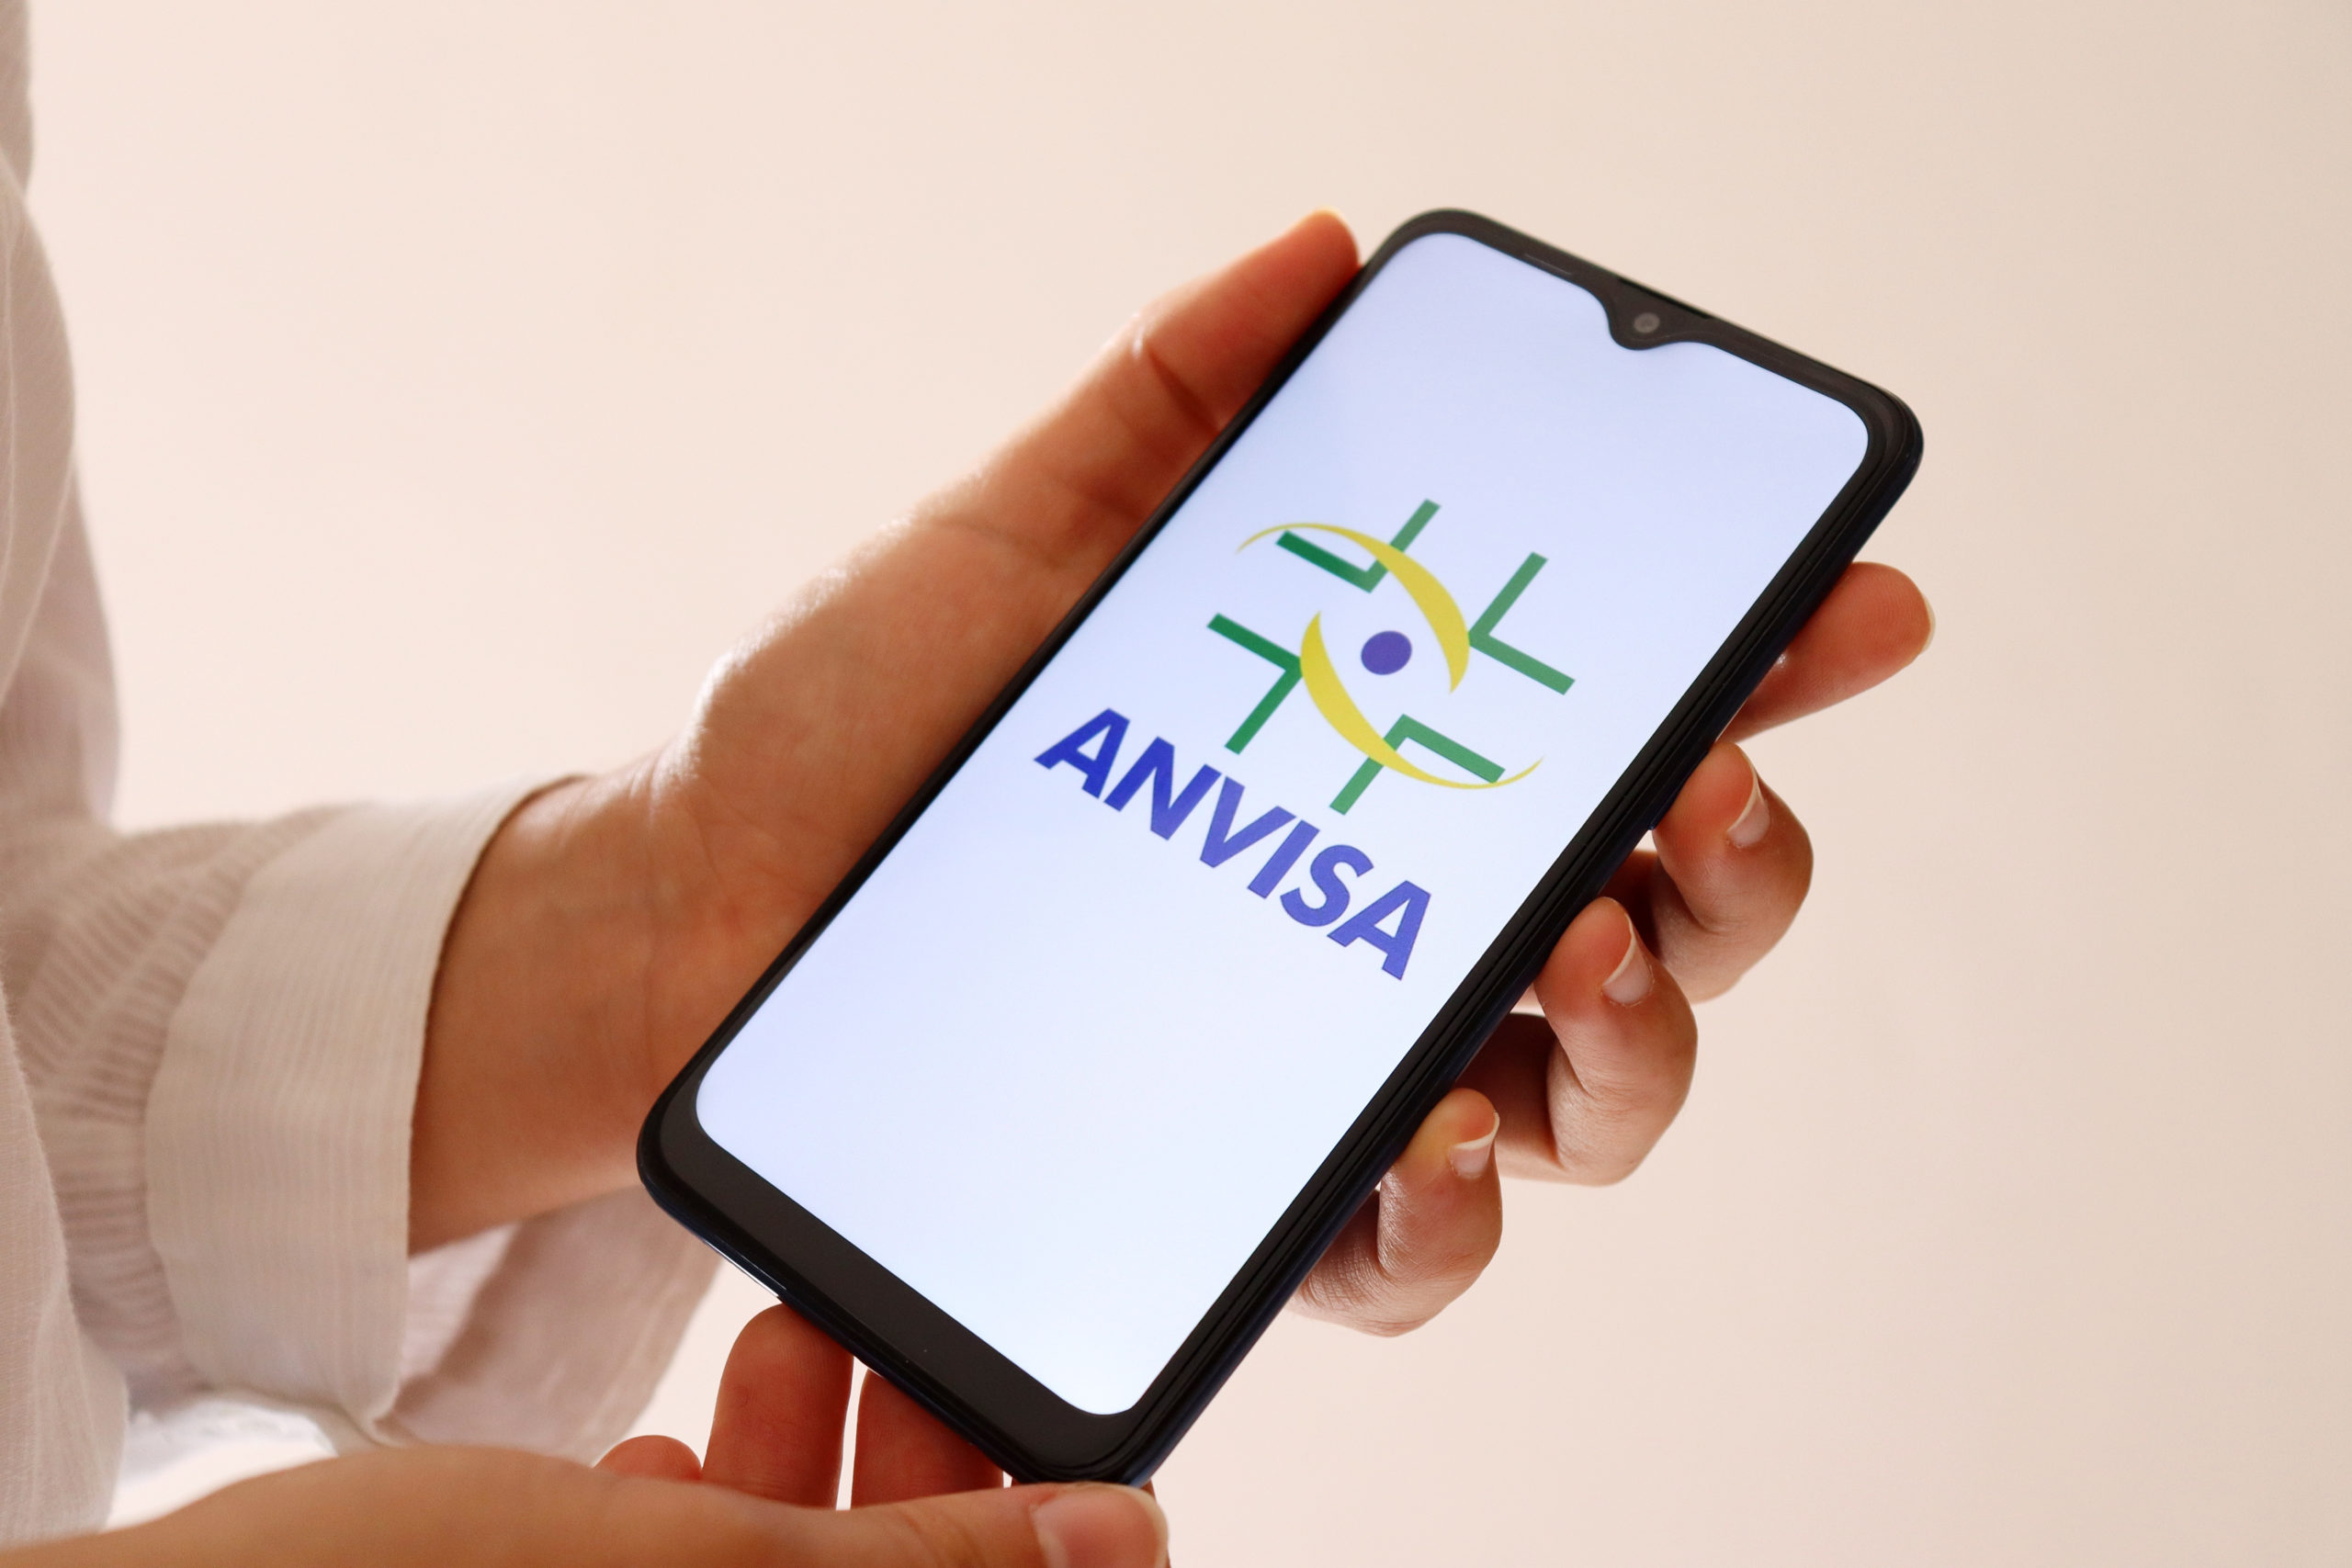 Two New Cannabis-Based Products Approved by ANVISA